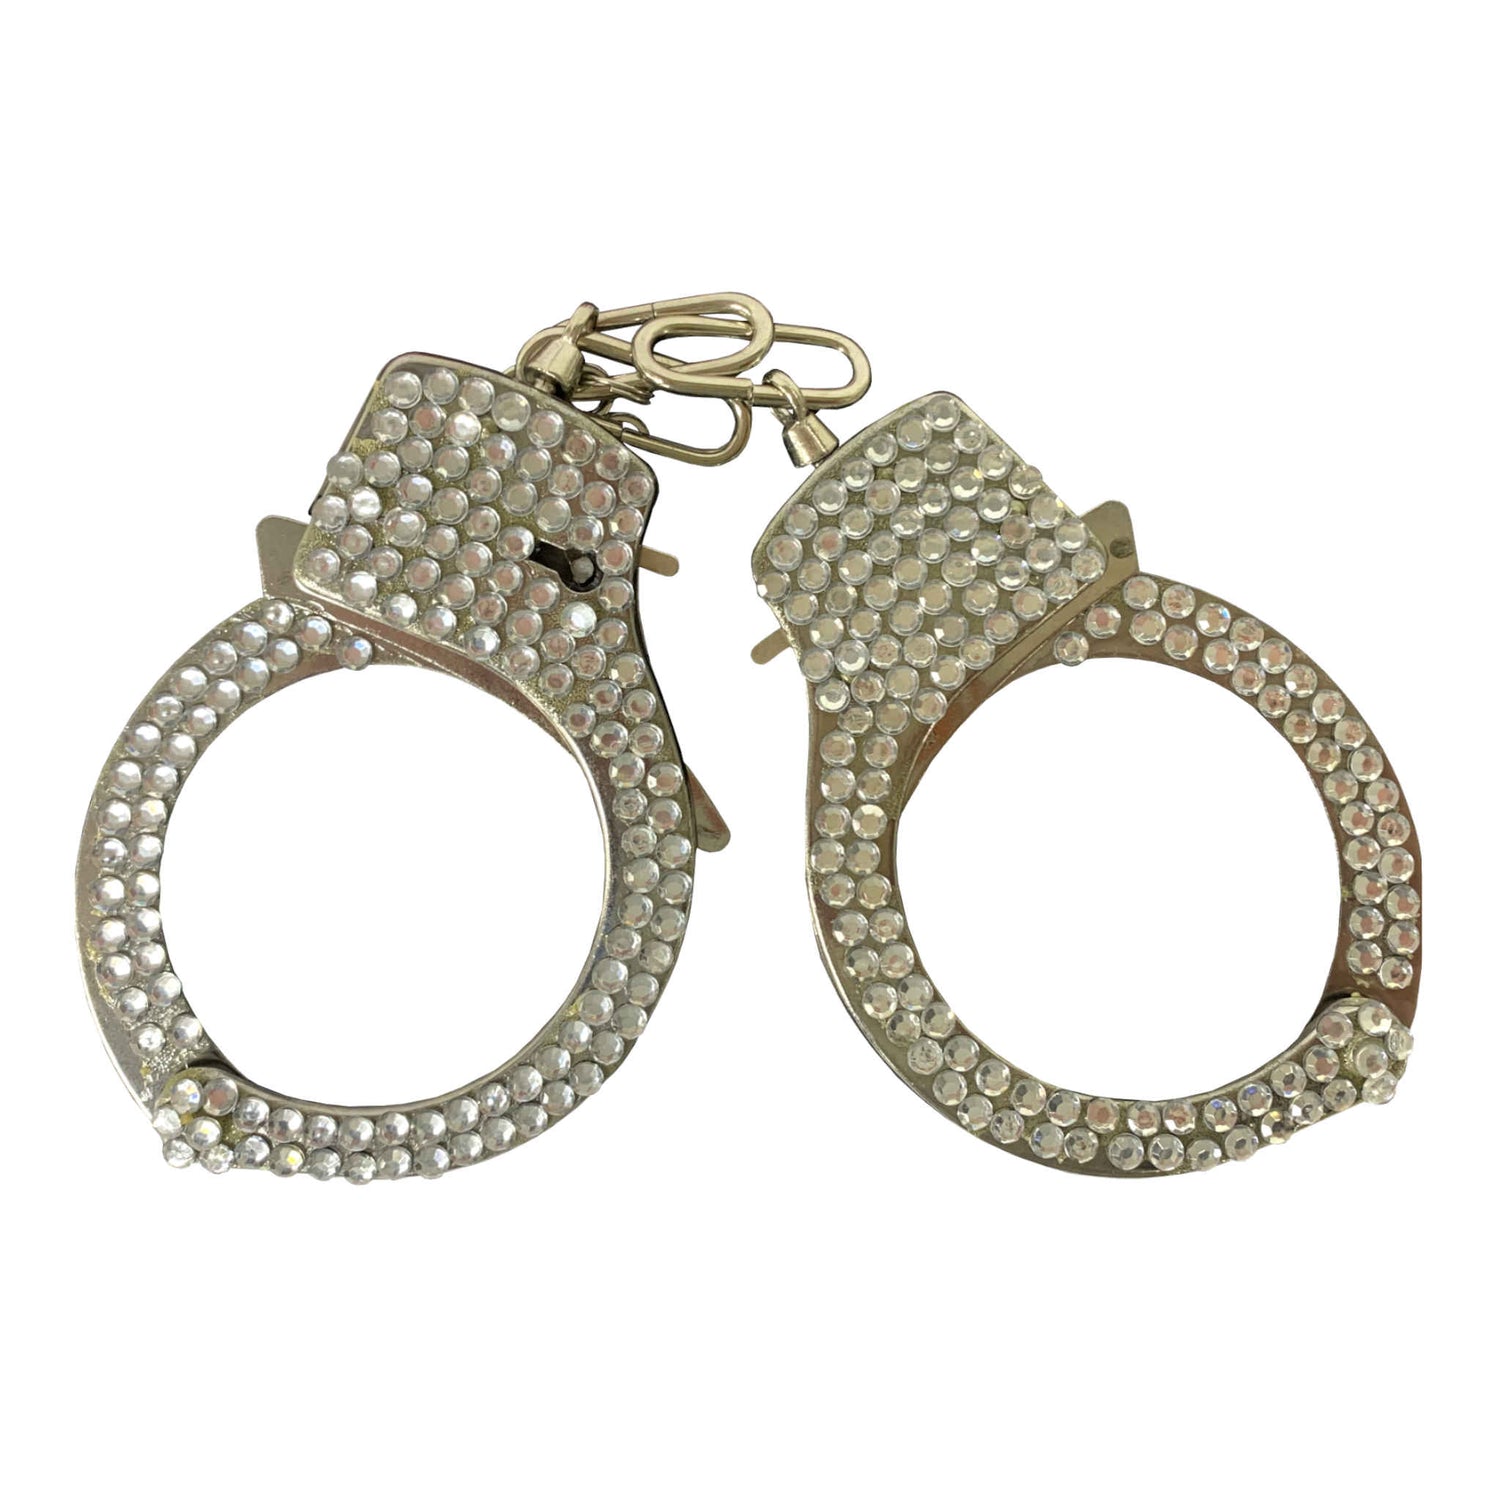 Novelty Police Handcuffs with Keys